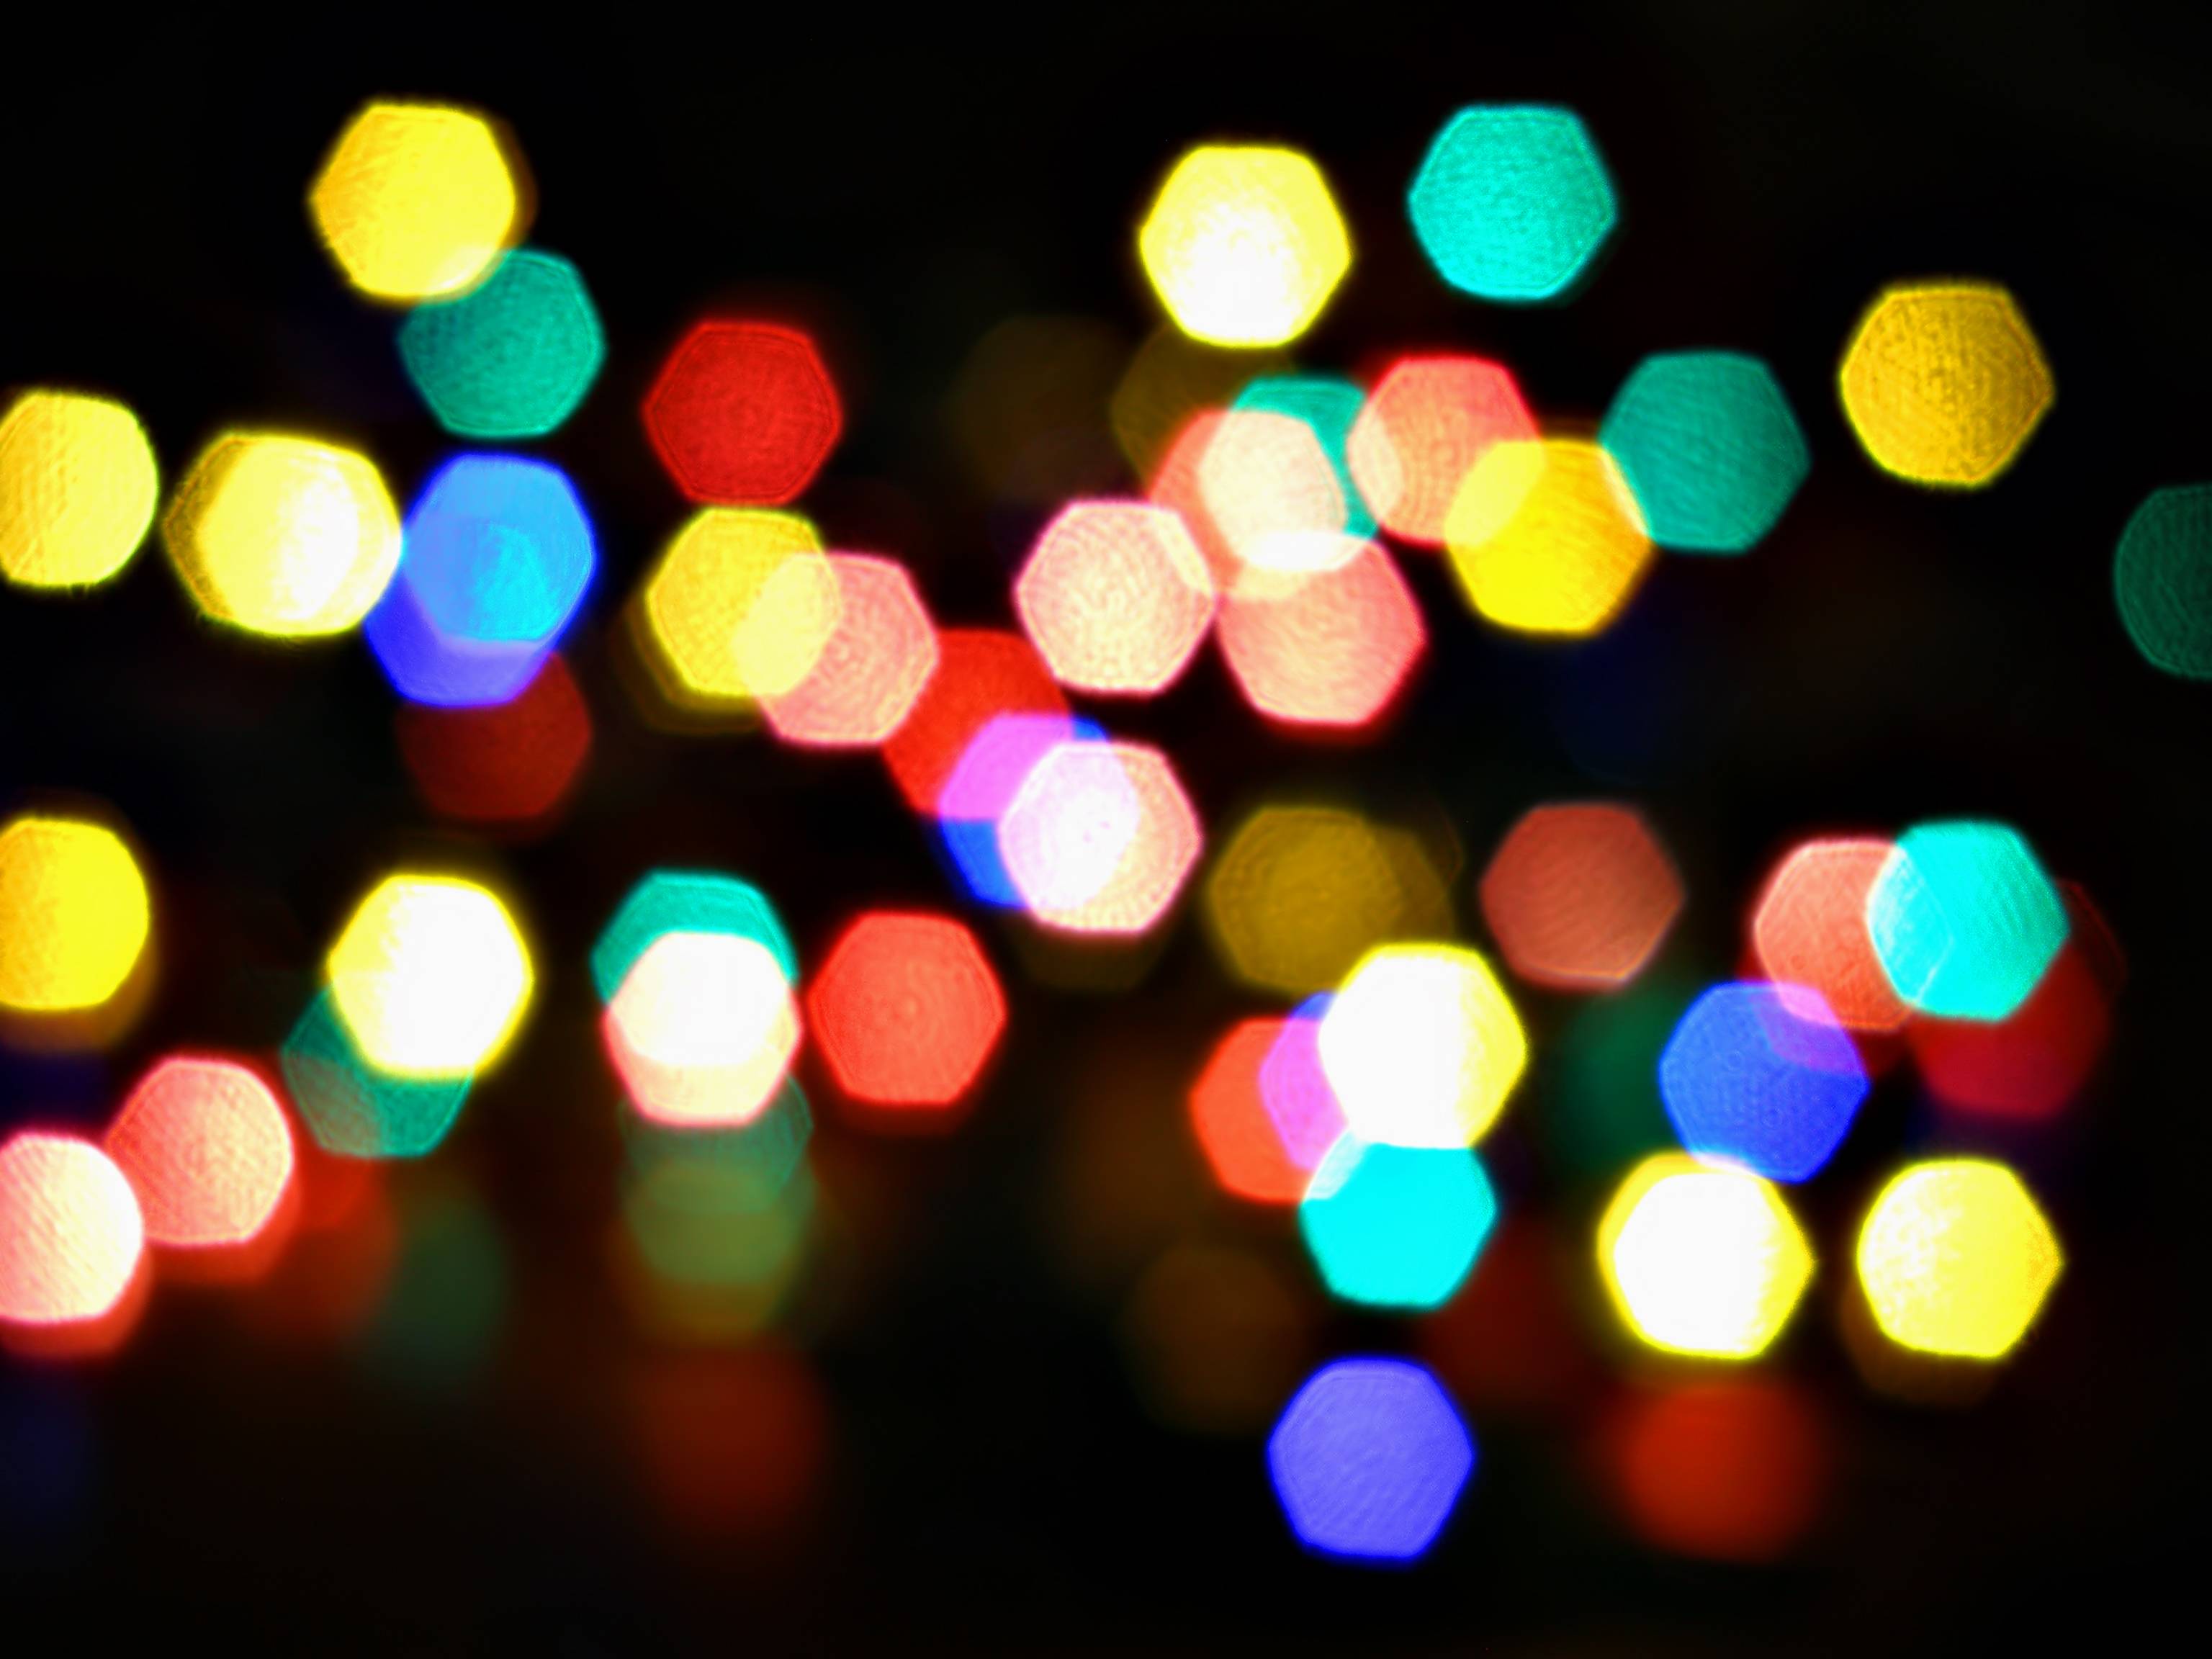 Free Christmas light background from Depositphotos.comSteps